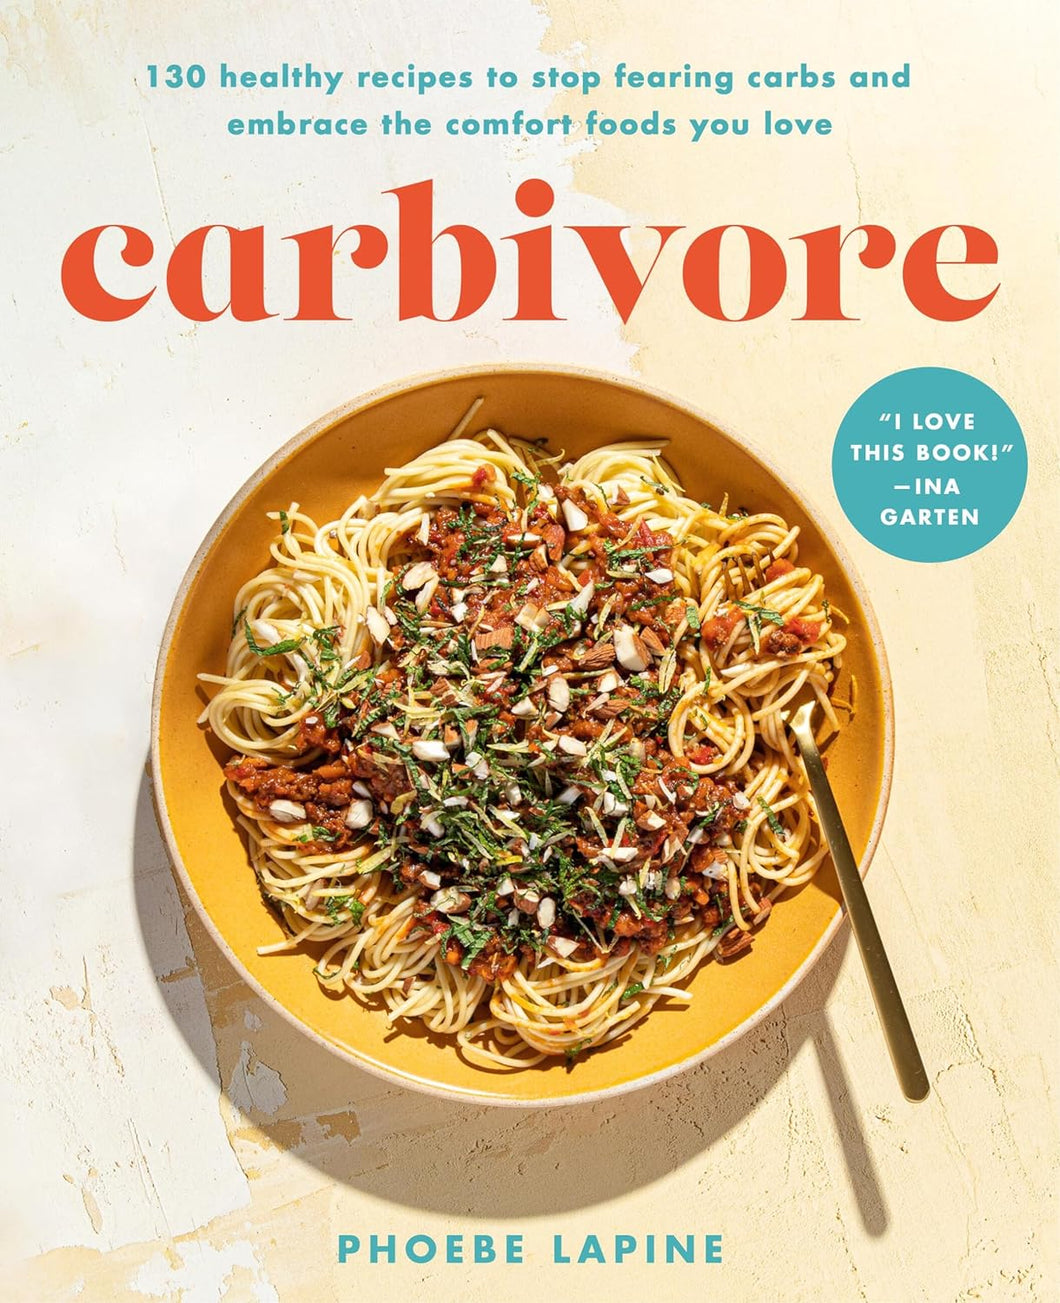 Carbivore 130 Healthy Recipes to Stop Fearing Carbs and Embrace the Comfort Foods You Love by Phoebe Lapine